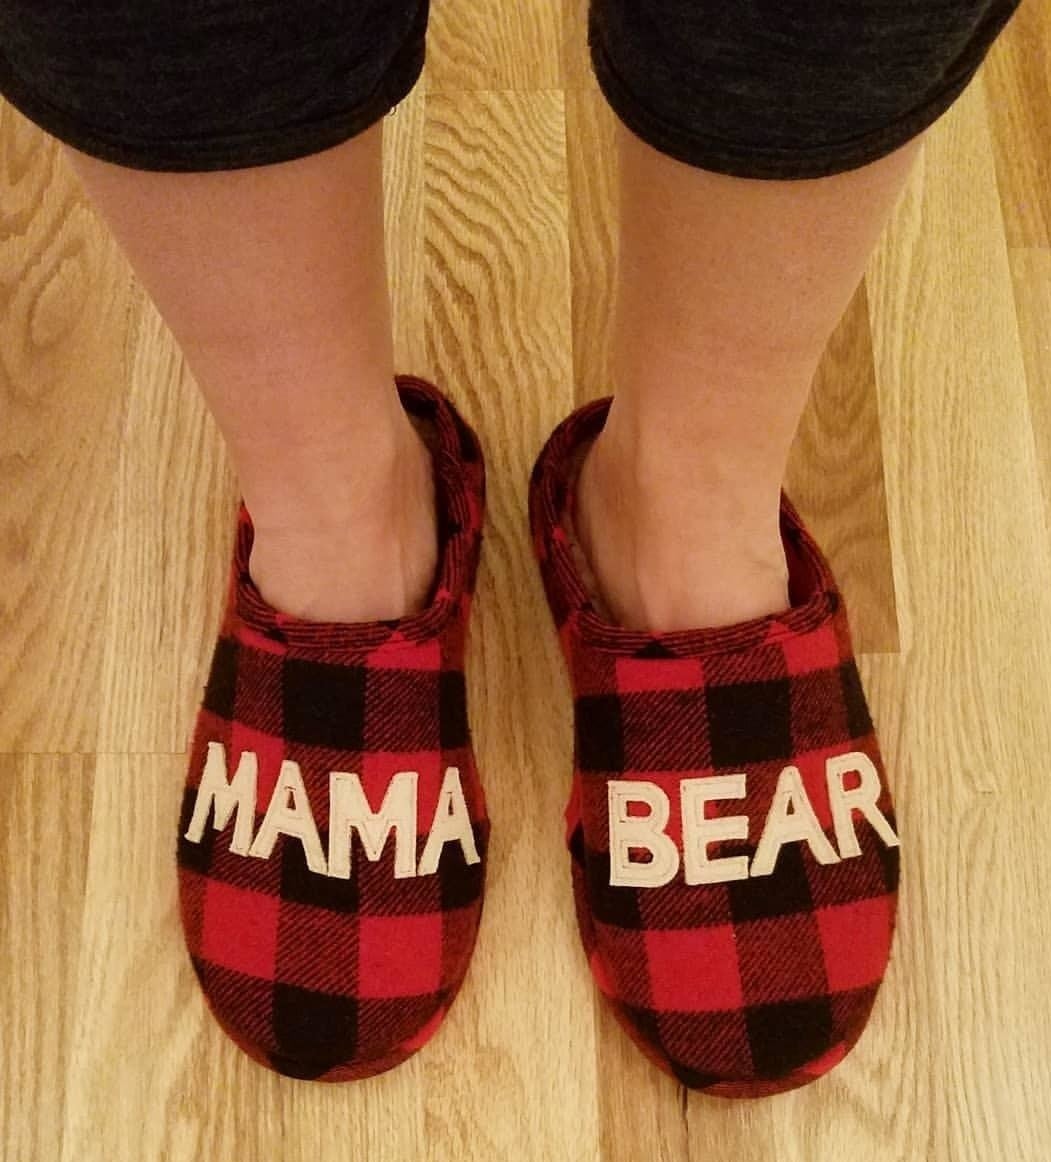 Image of reviewer wearing red plaid slippers